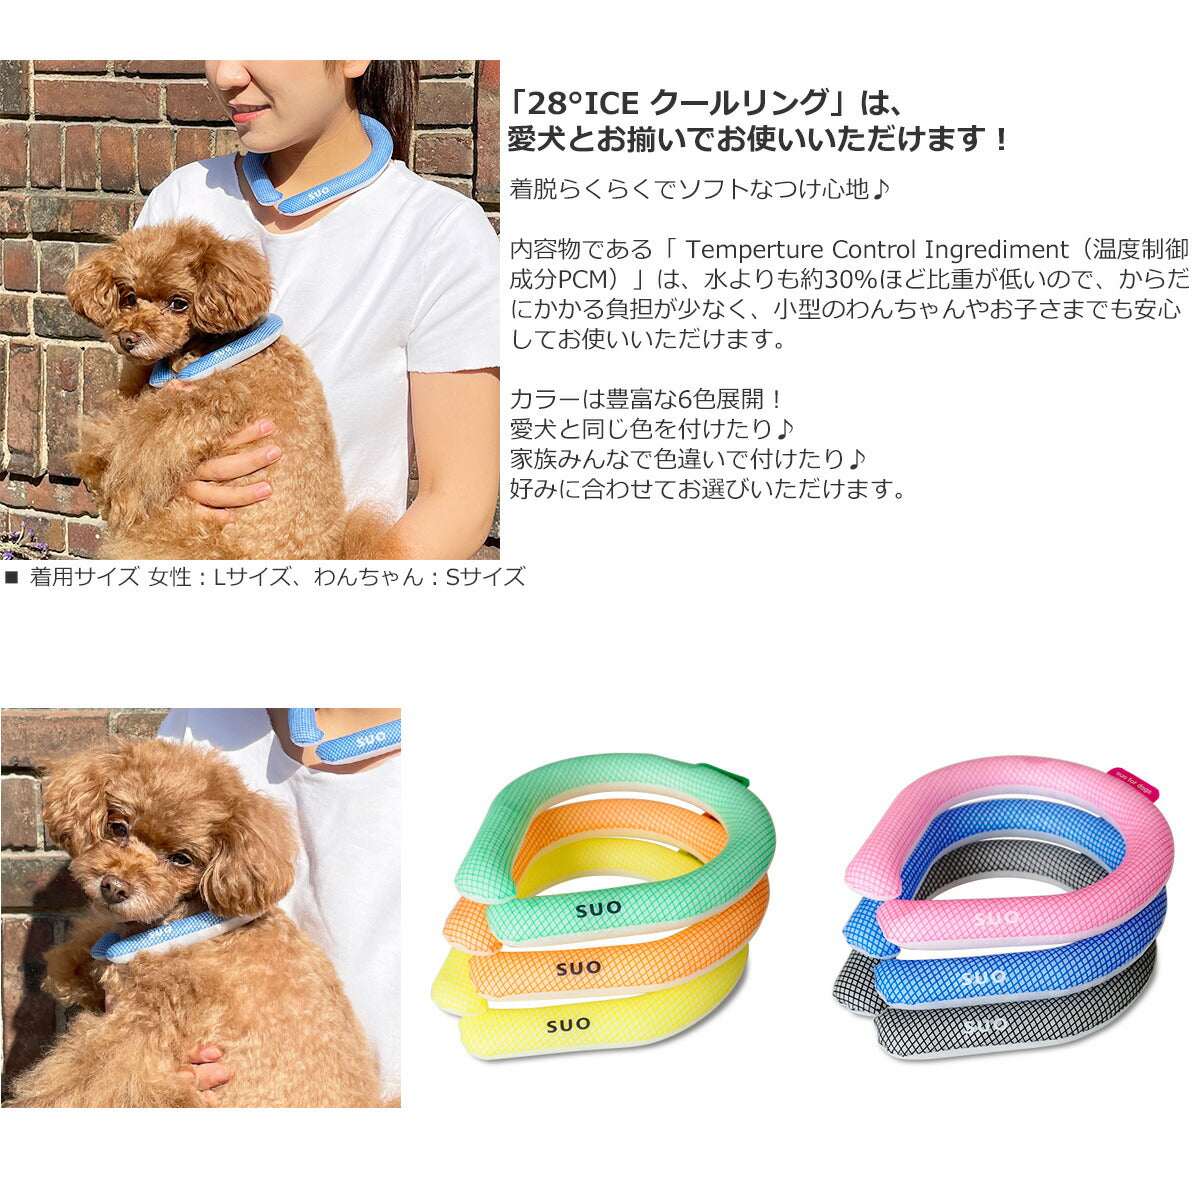 SUO for dogs 28°ICE SUOリング ボタンなし M オレンジ 熱中症対策グッズ 暑さ対策 ひんやり 首 冷感 犬 大人 子供